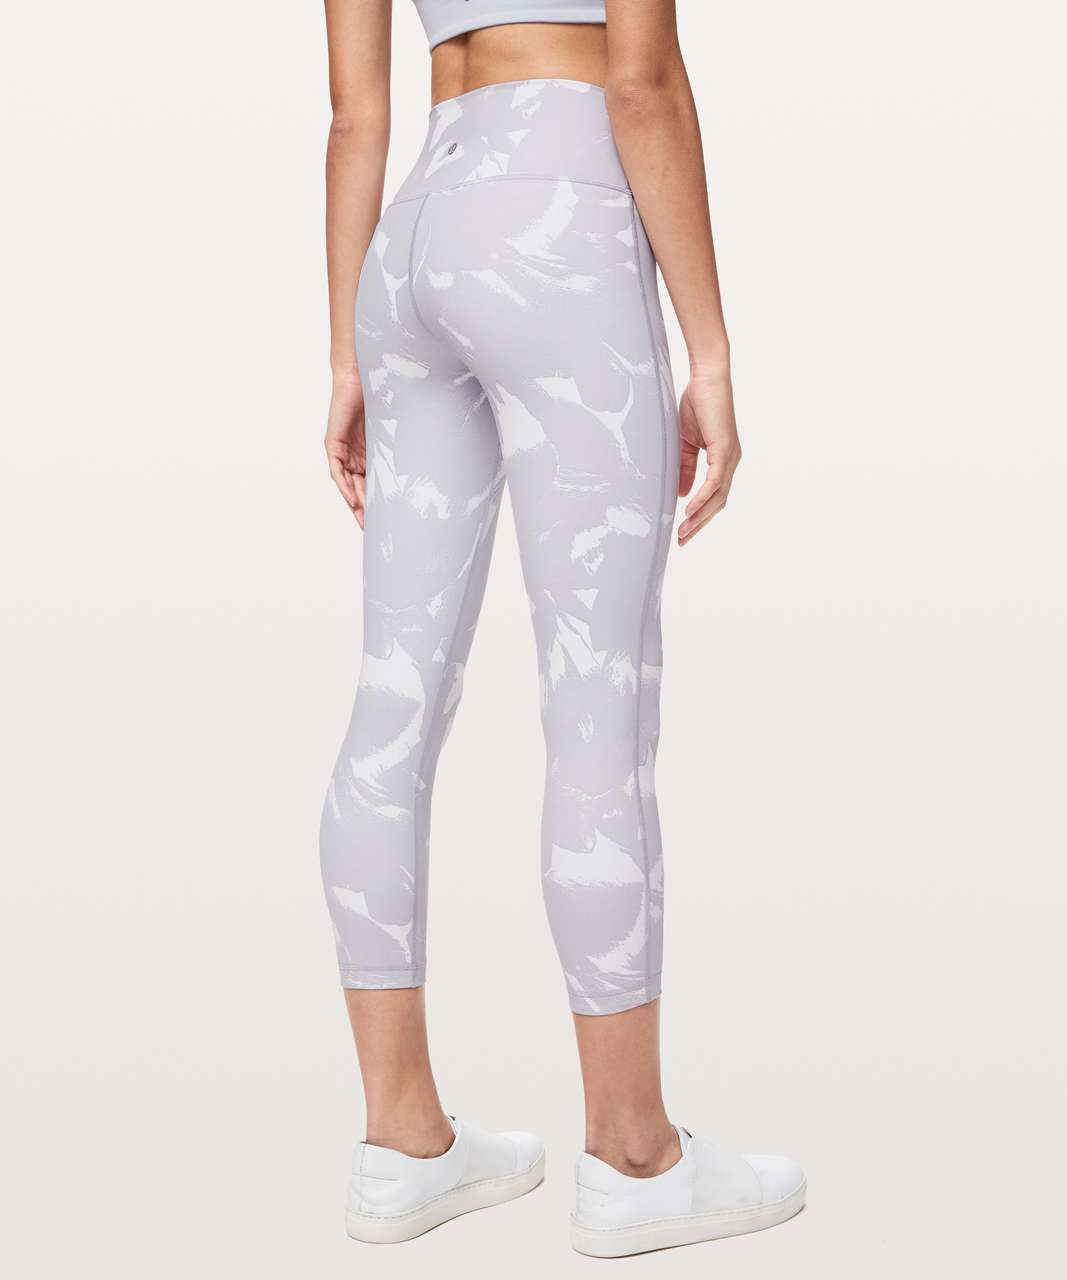 Lululemon Wunder Under High-Rise Tight 25" *Full-On Luxtreme - Flower Pop White Silver Lilac